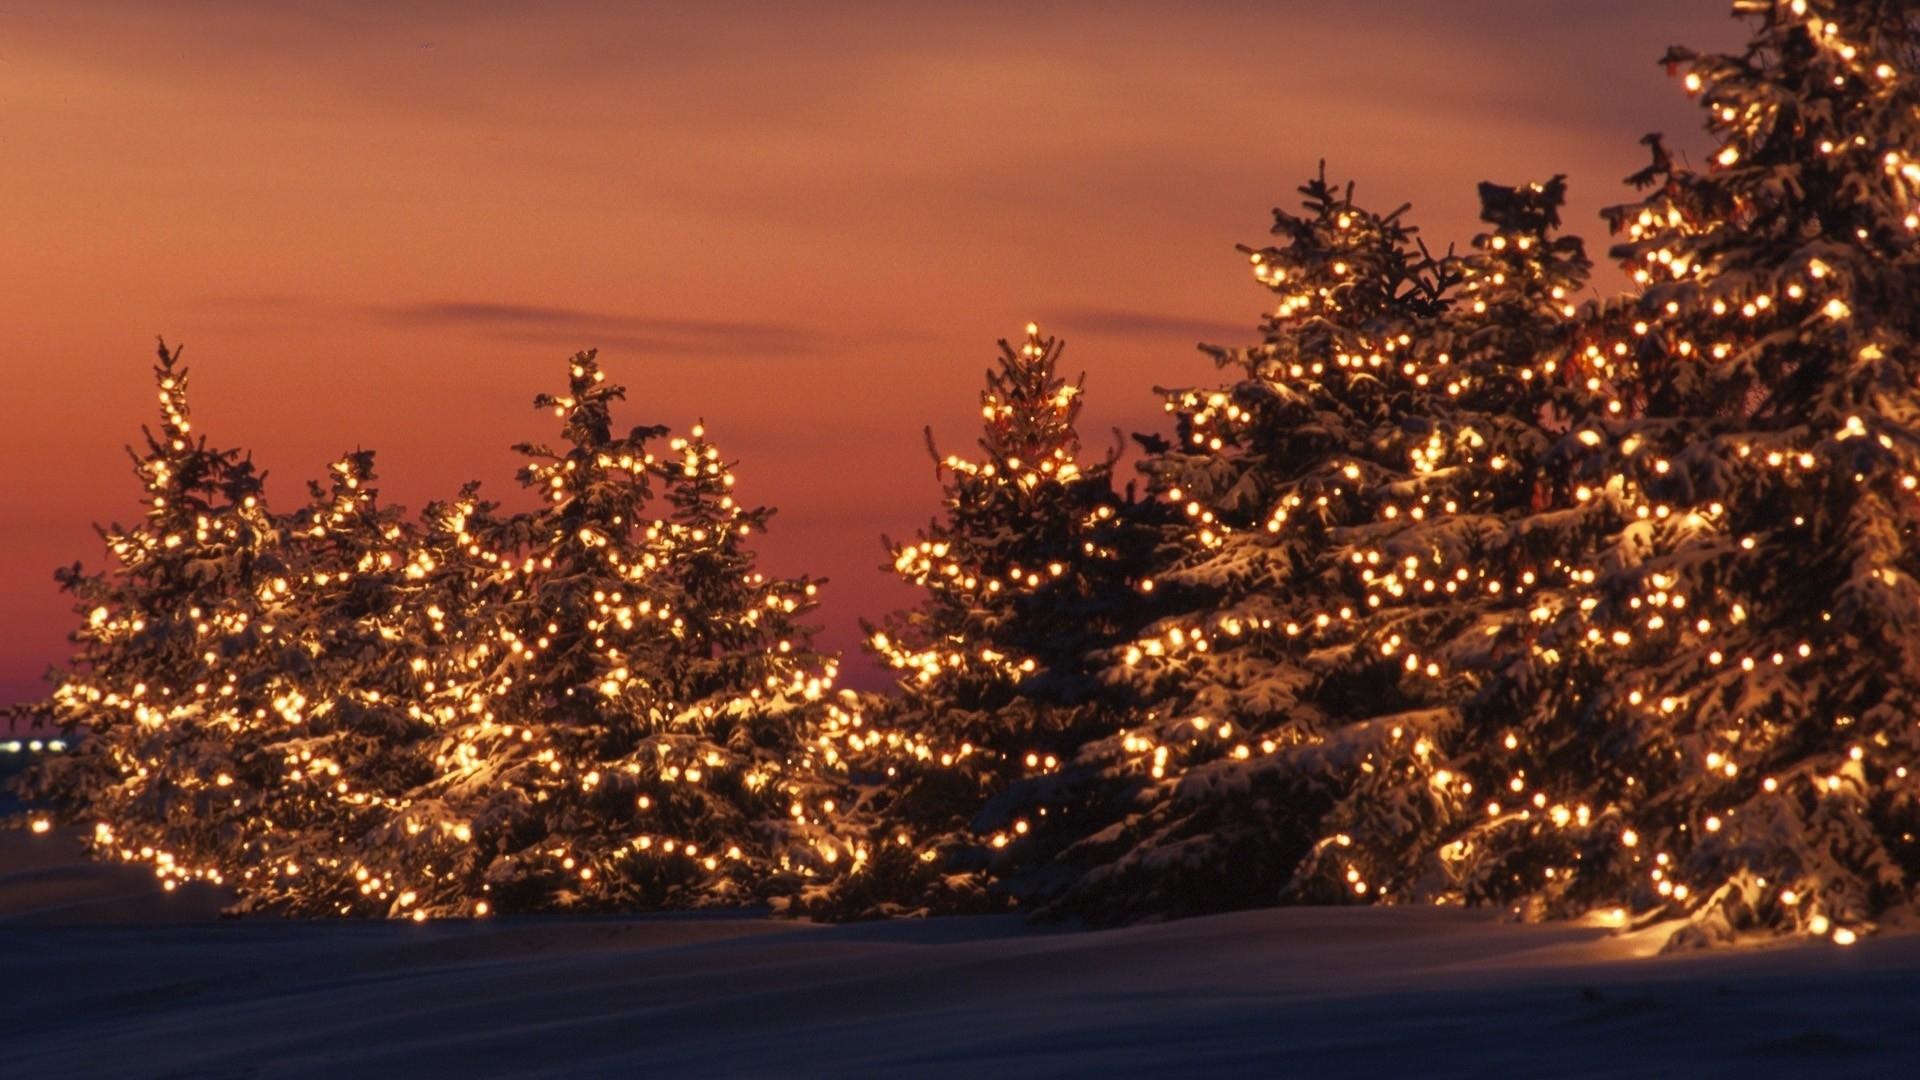 1920x1080 Full Size of Christmas: Christmas Lights Background For Desktop Images  Phenomenal: ...